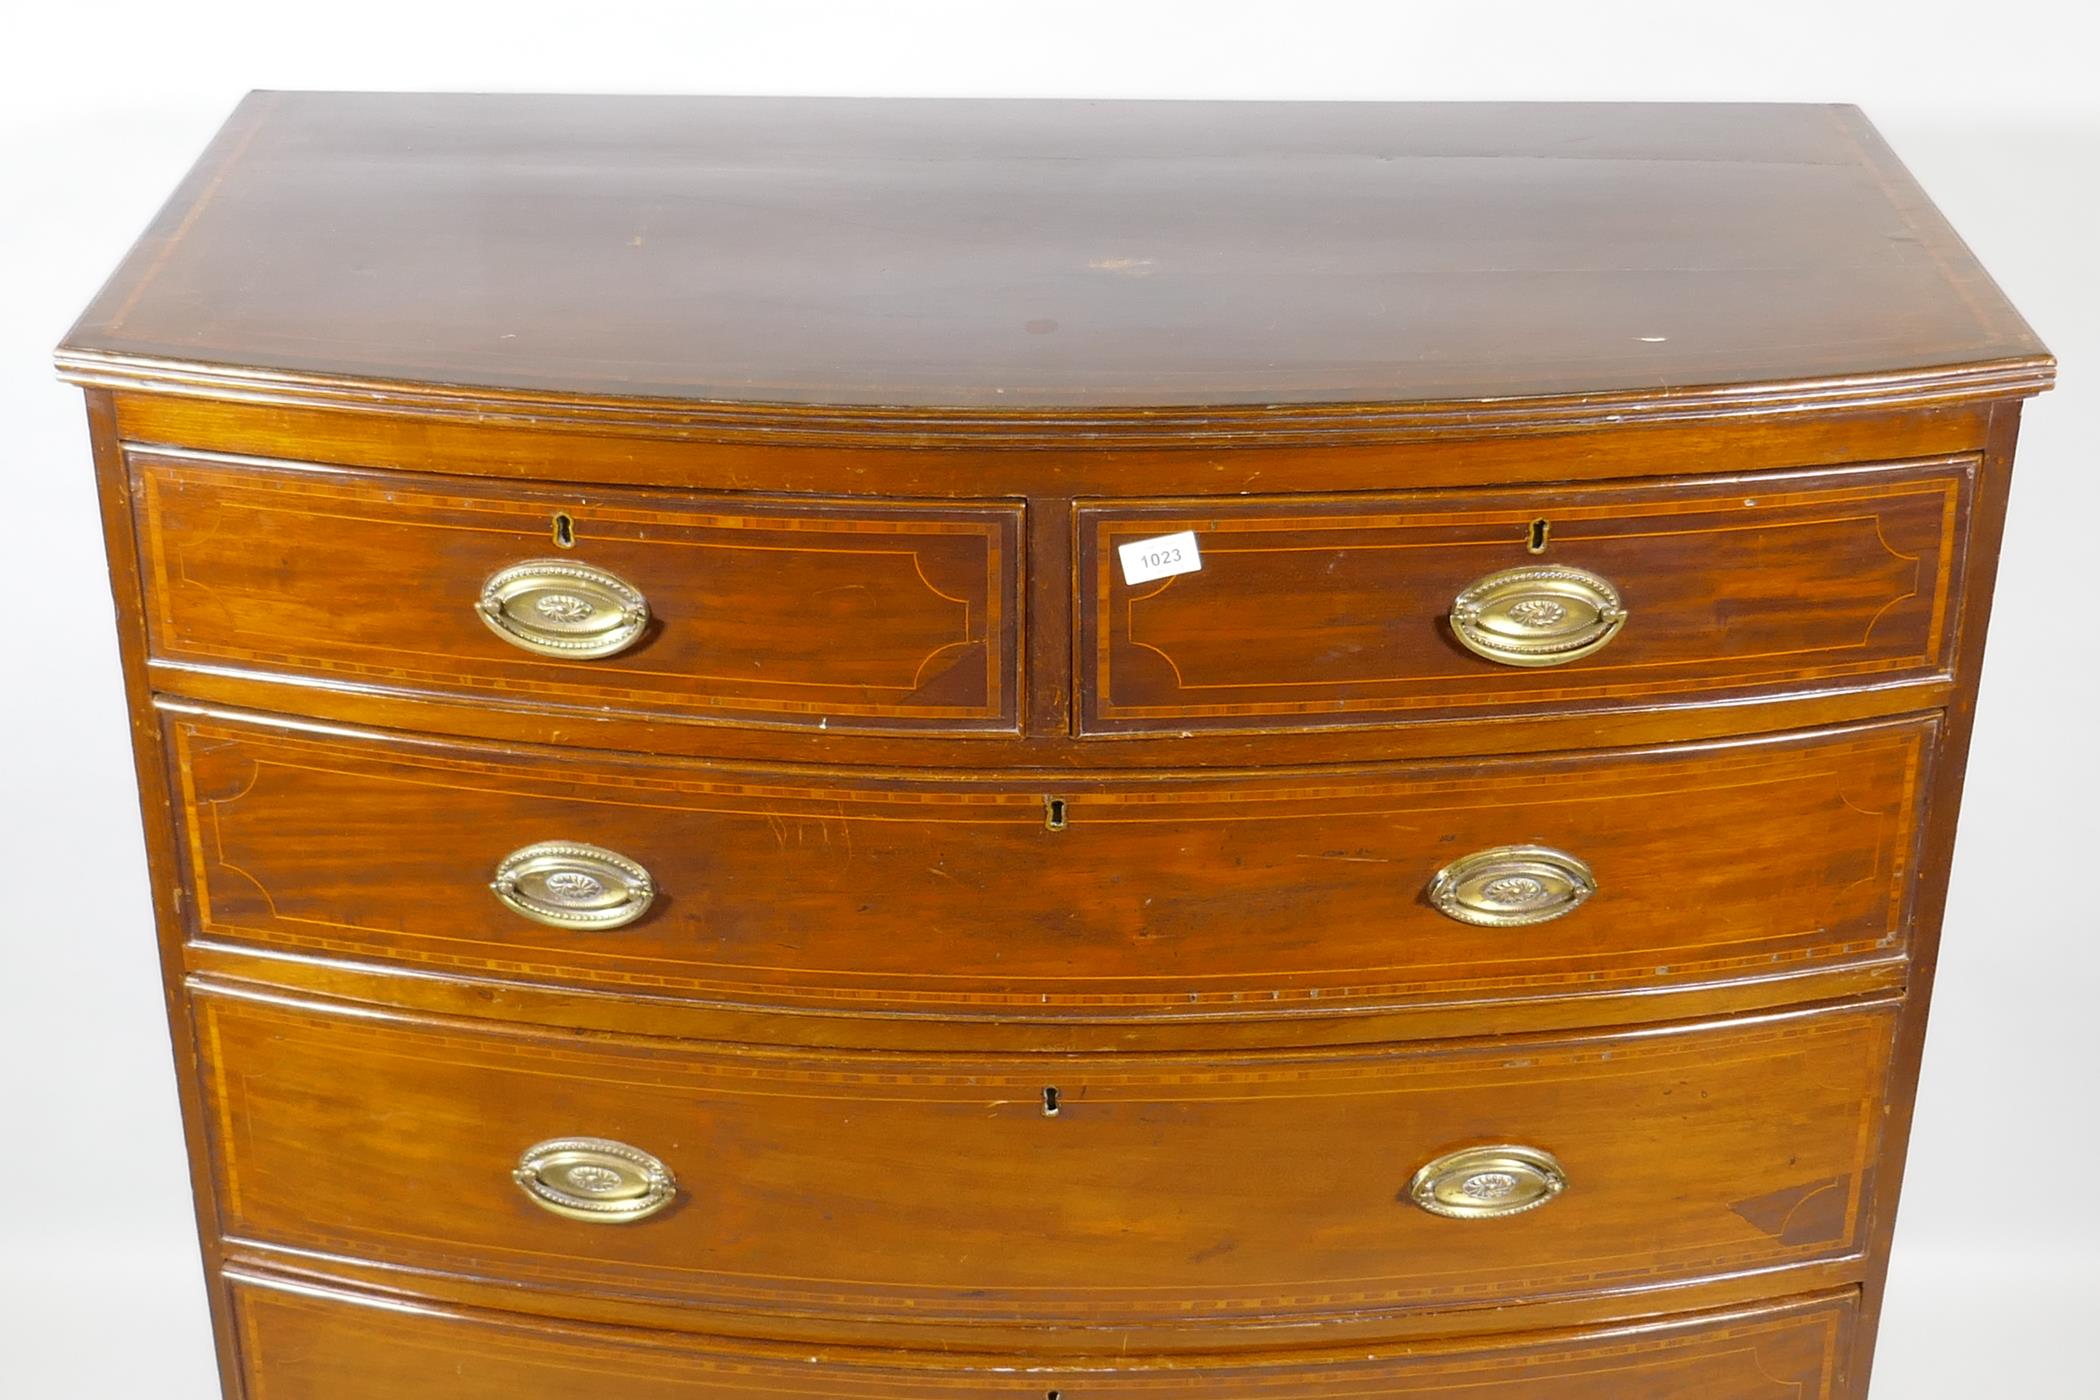 A George III inlaid mahogany bowfront chest of two plus three drawers, with brass plate handles, - Image 2 of 3